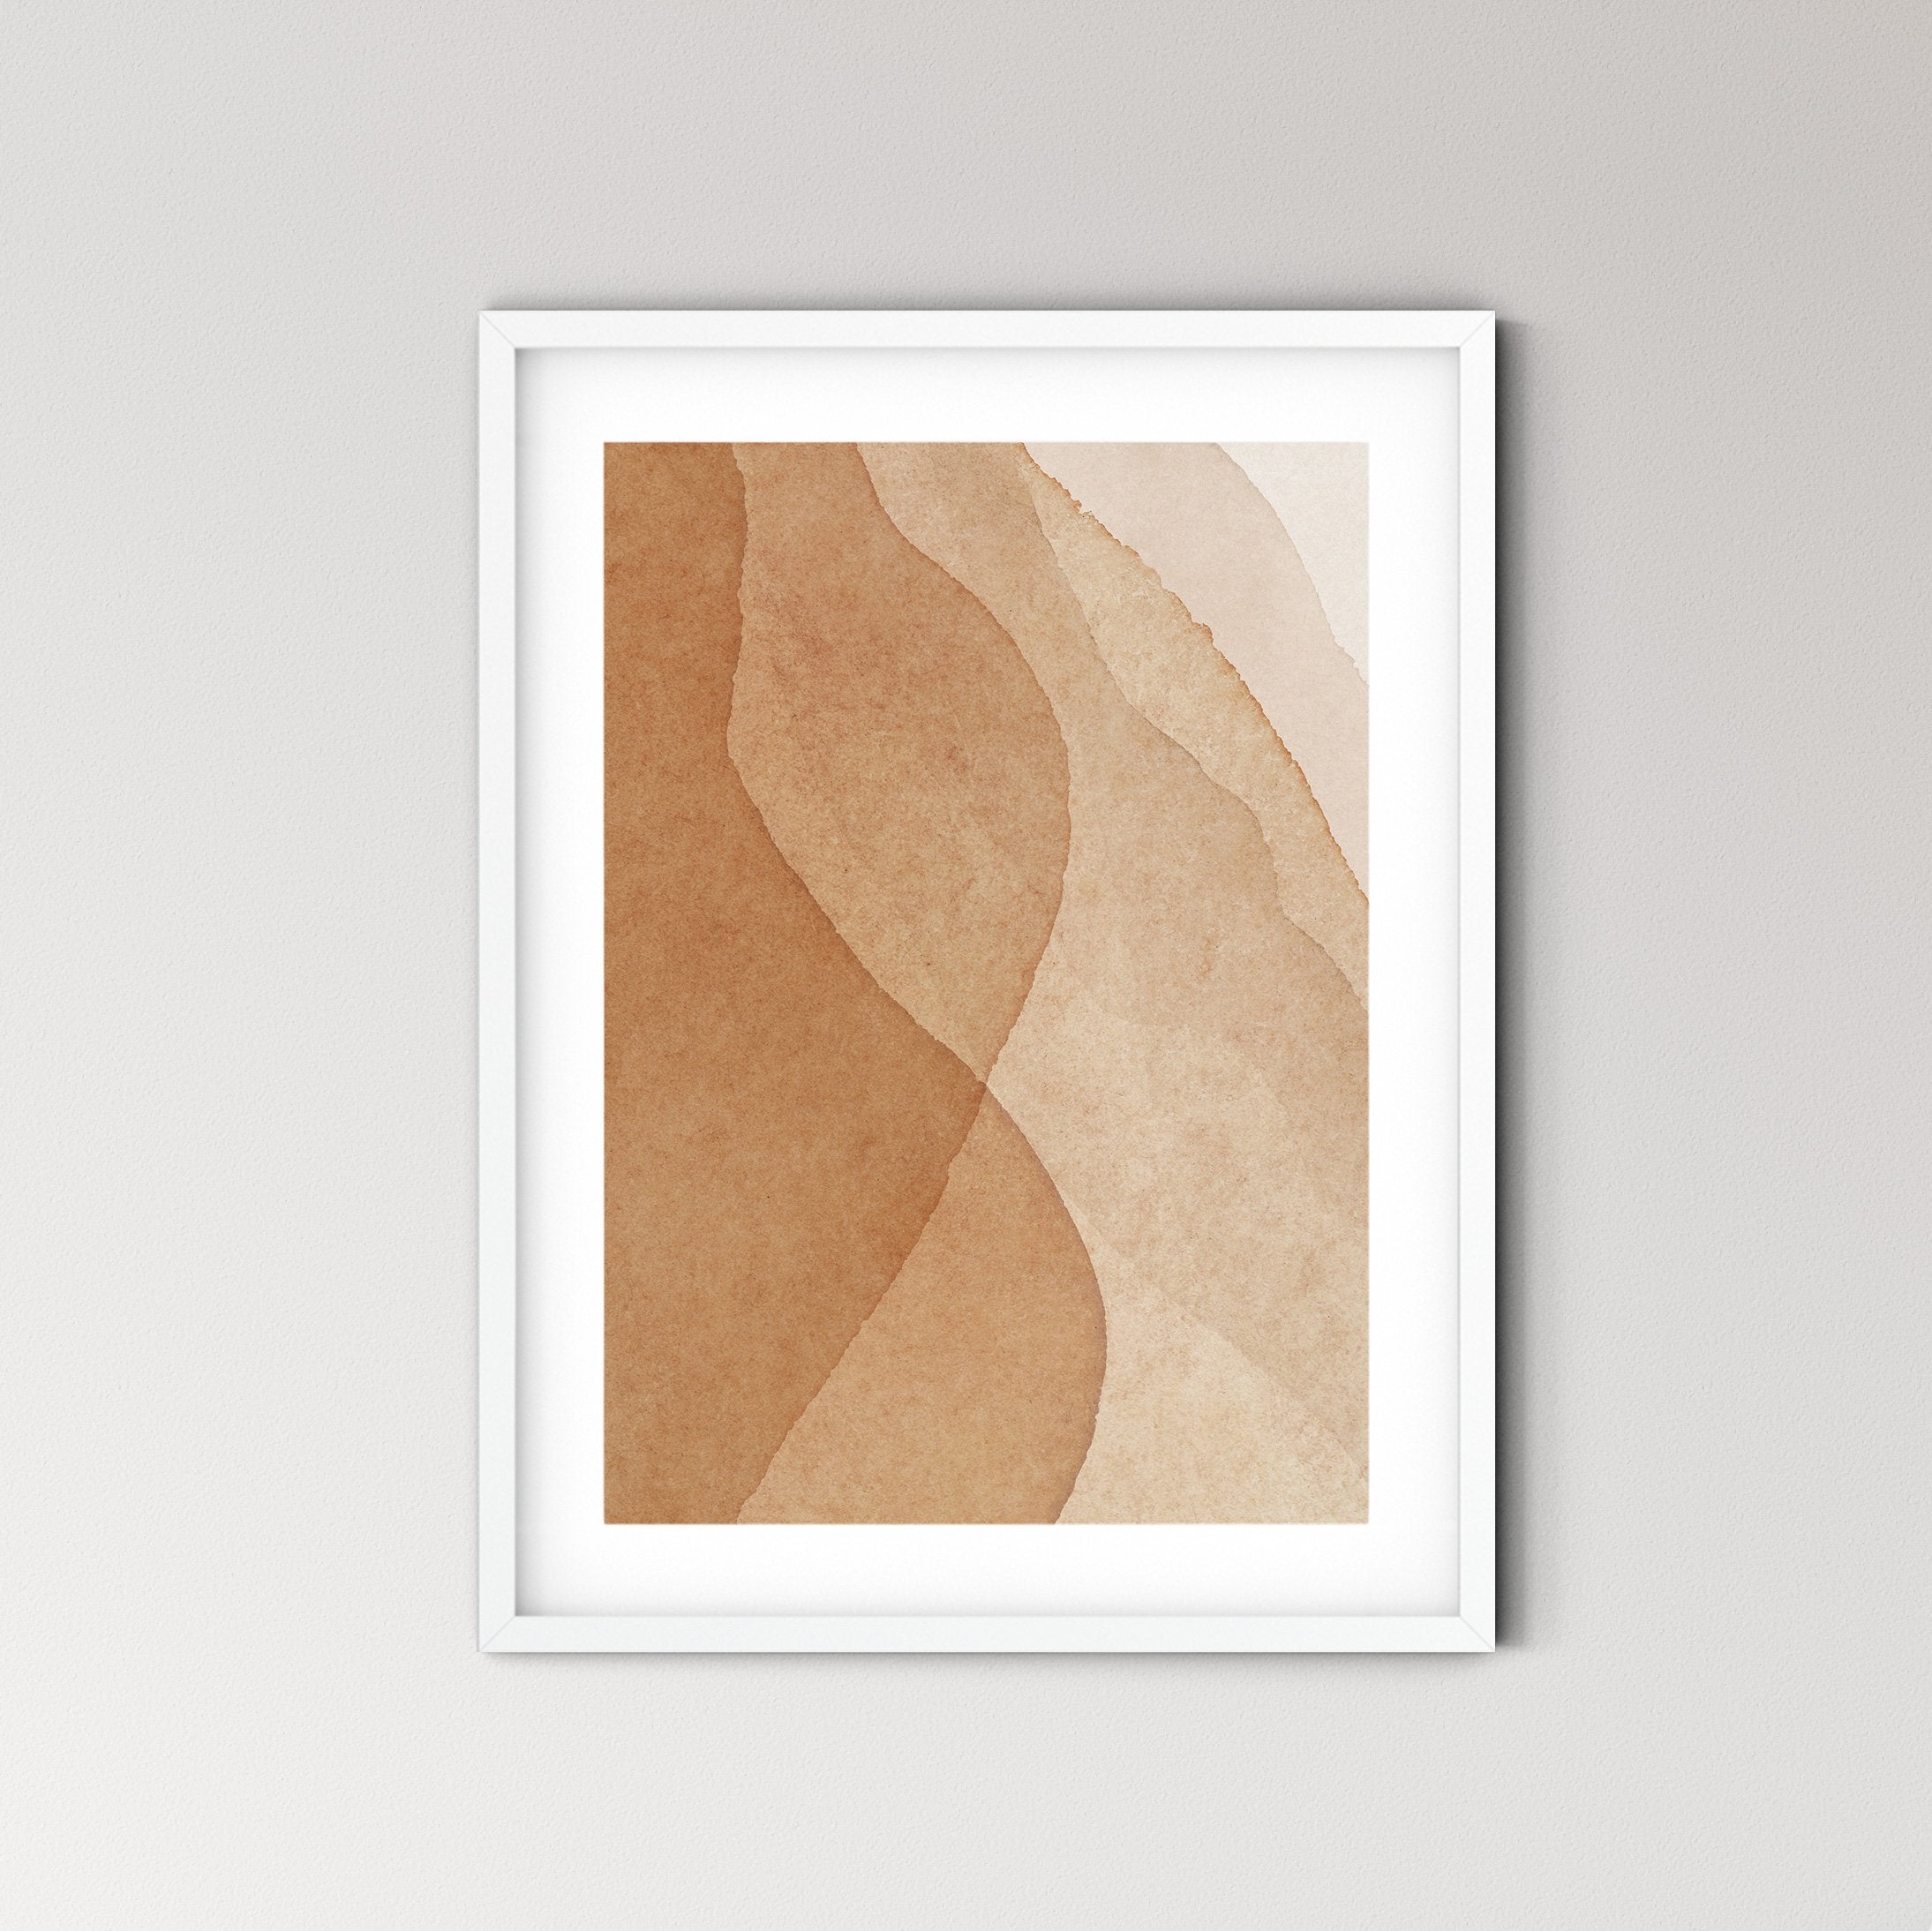 Golden Boho Abstract Landscape Art Print No.6 - Feathers and Stone